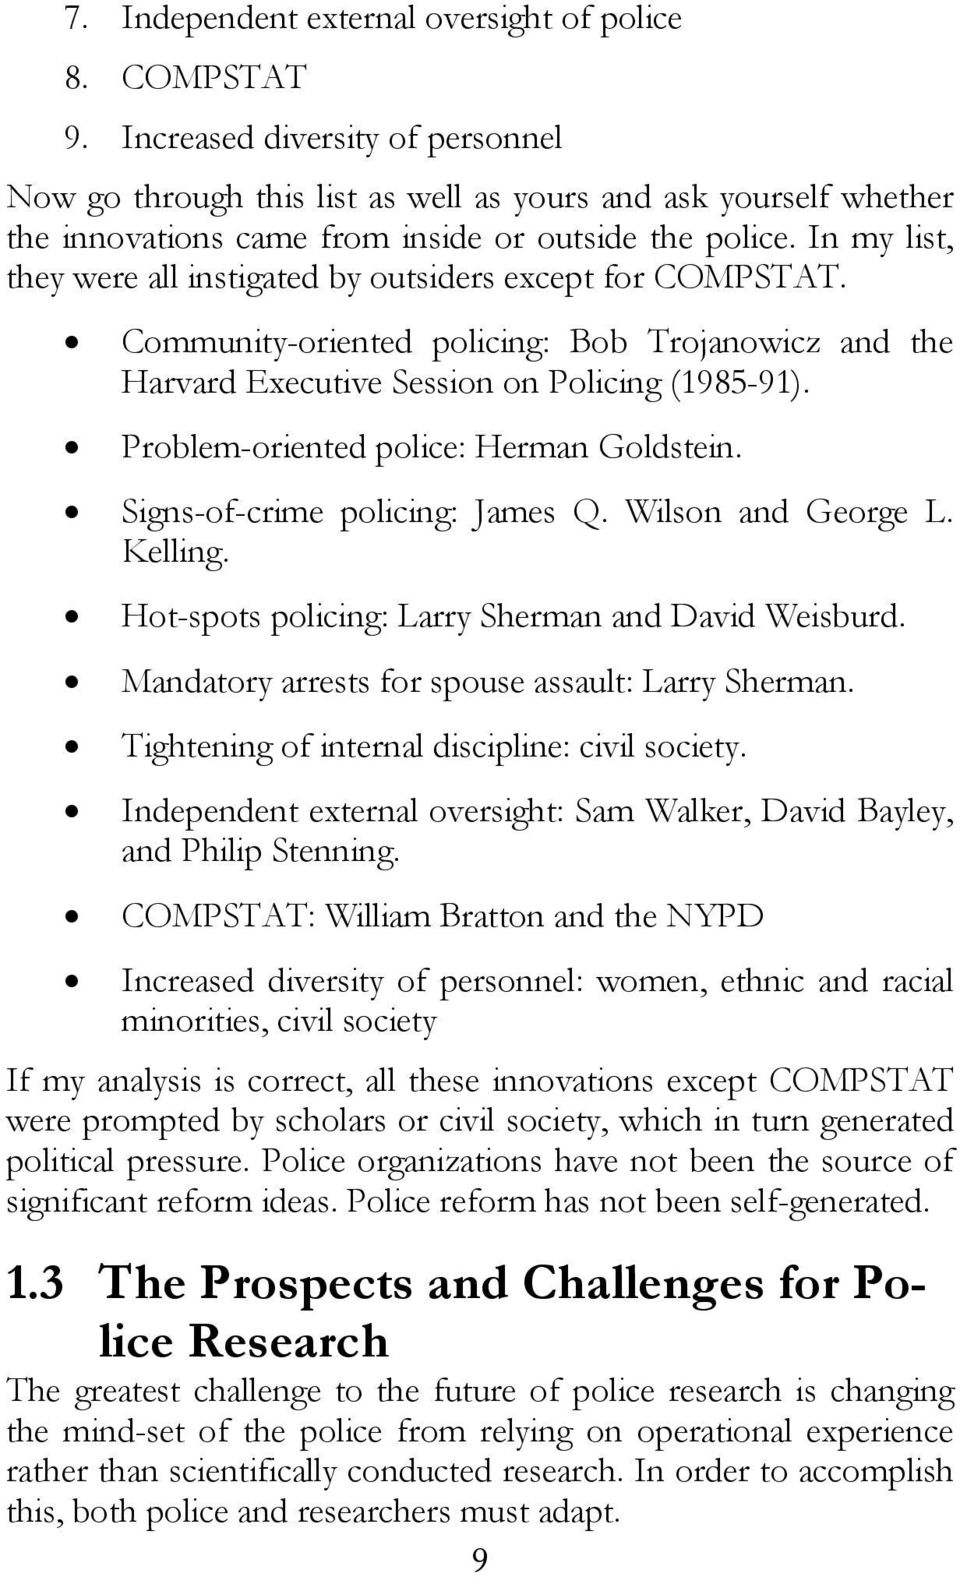 In my list, they were all instigated by outsiders except for COMPSTAT. Community-oriented policing: Bob Trojanowicz and the Harvard Executive Session on Policing (1985-91).